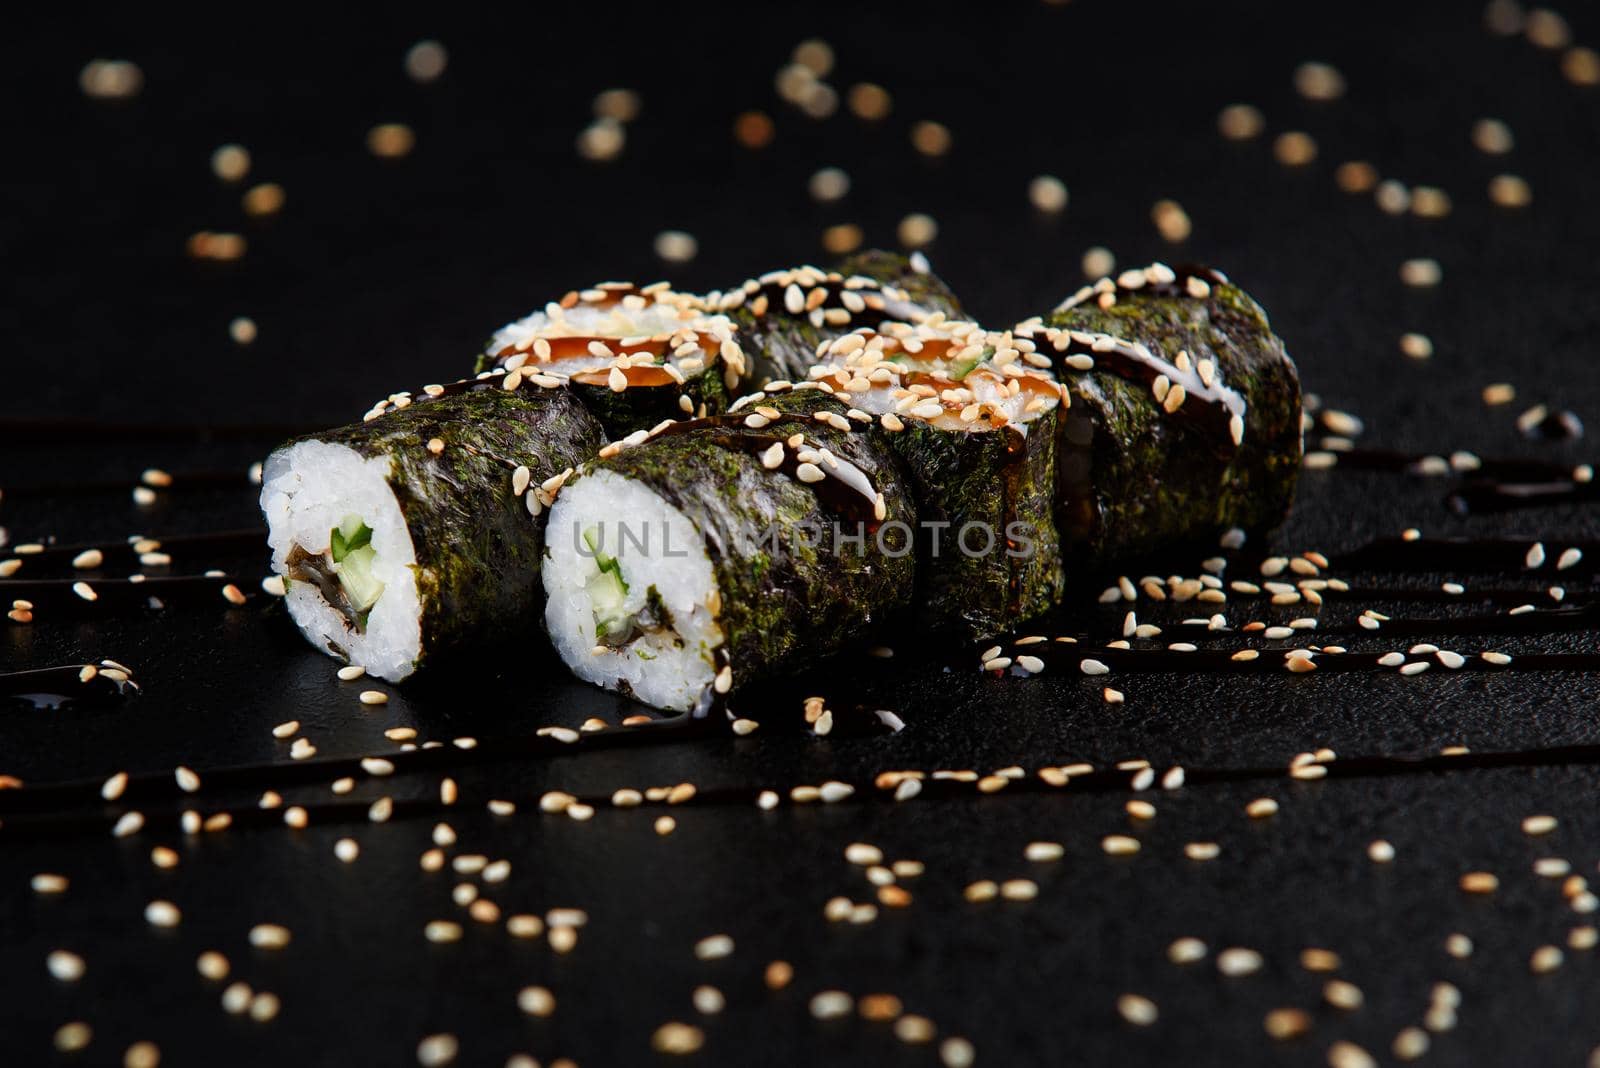 Sushi roll sea food on black background. Sushi delivery from the restaurant. Fresh delicious Japanese sushi with avocado, cucumber, shrimp and caviar on dark background